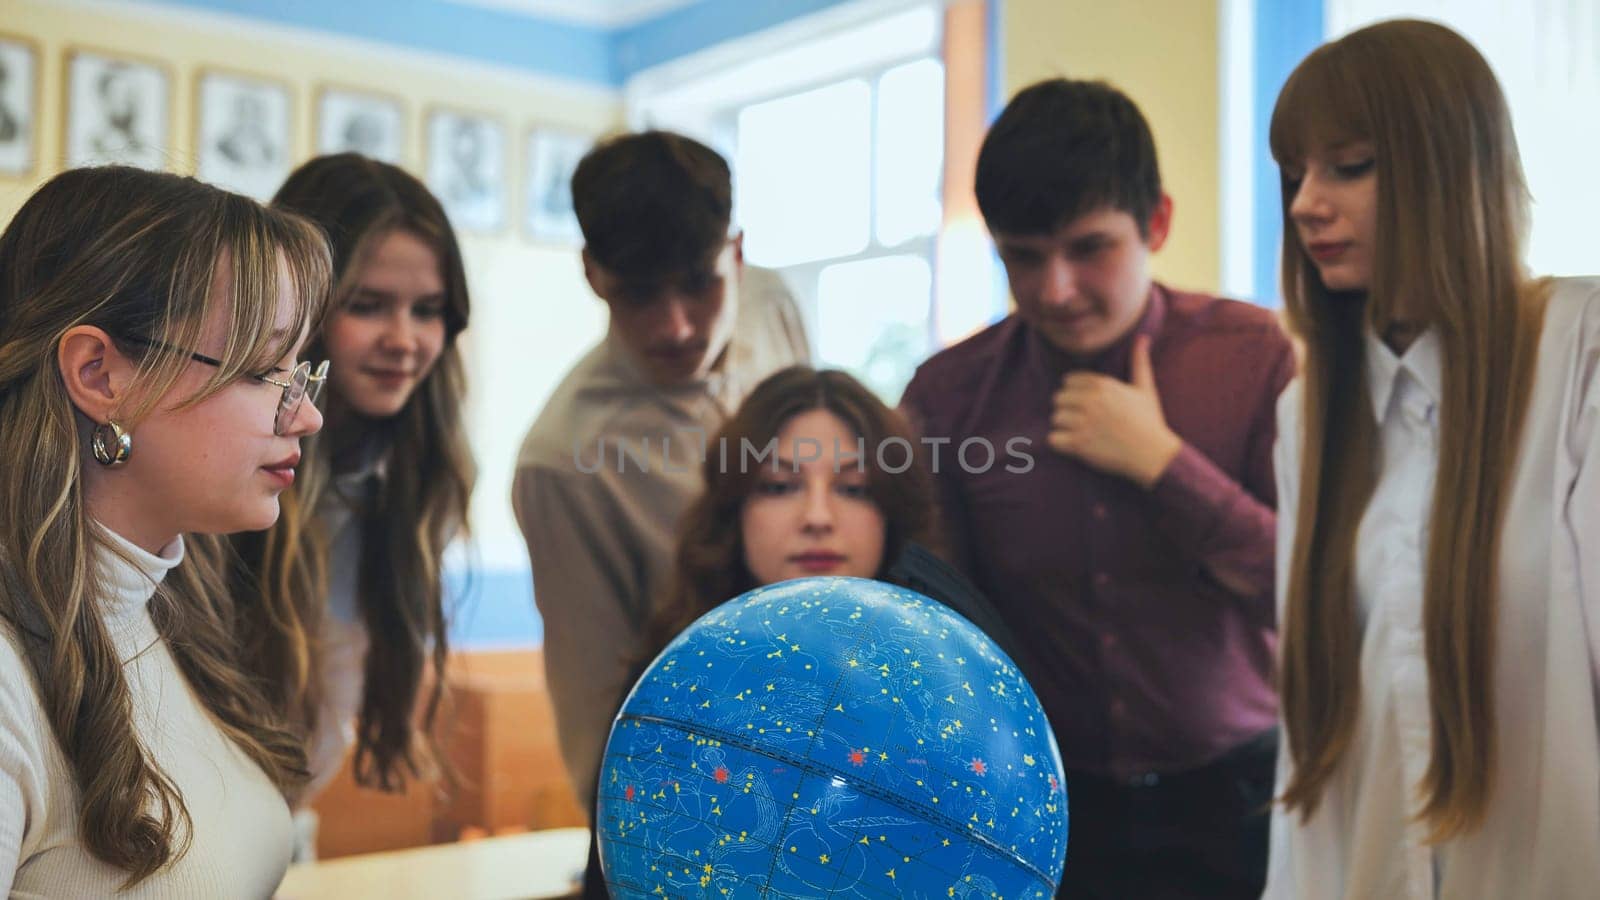 Students look at a globe of the starry sky in a classroom at school